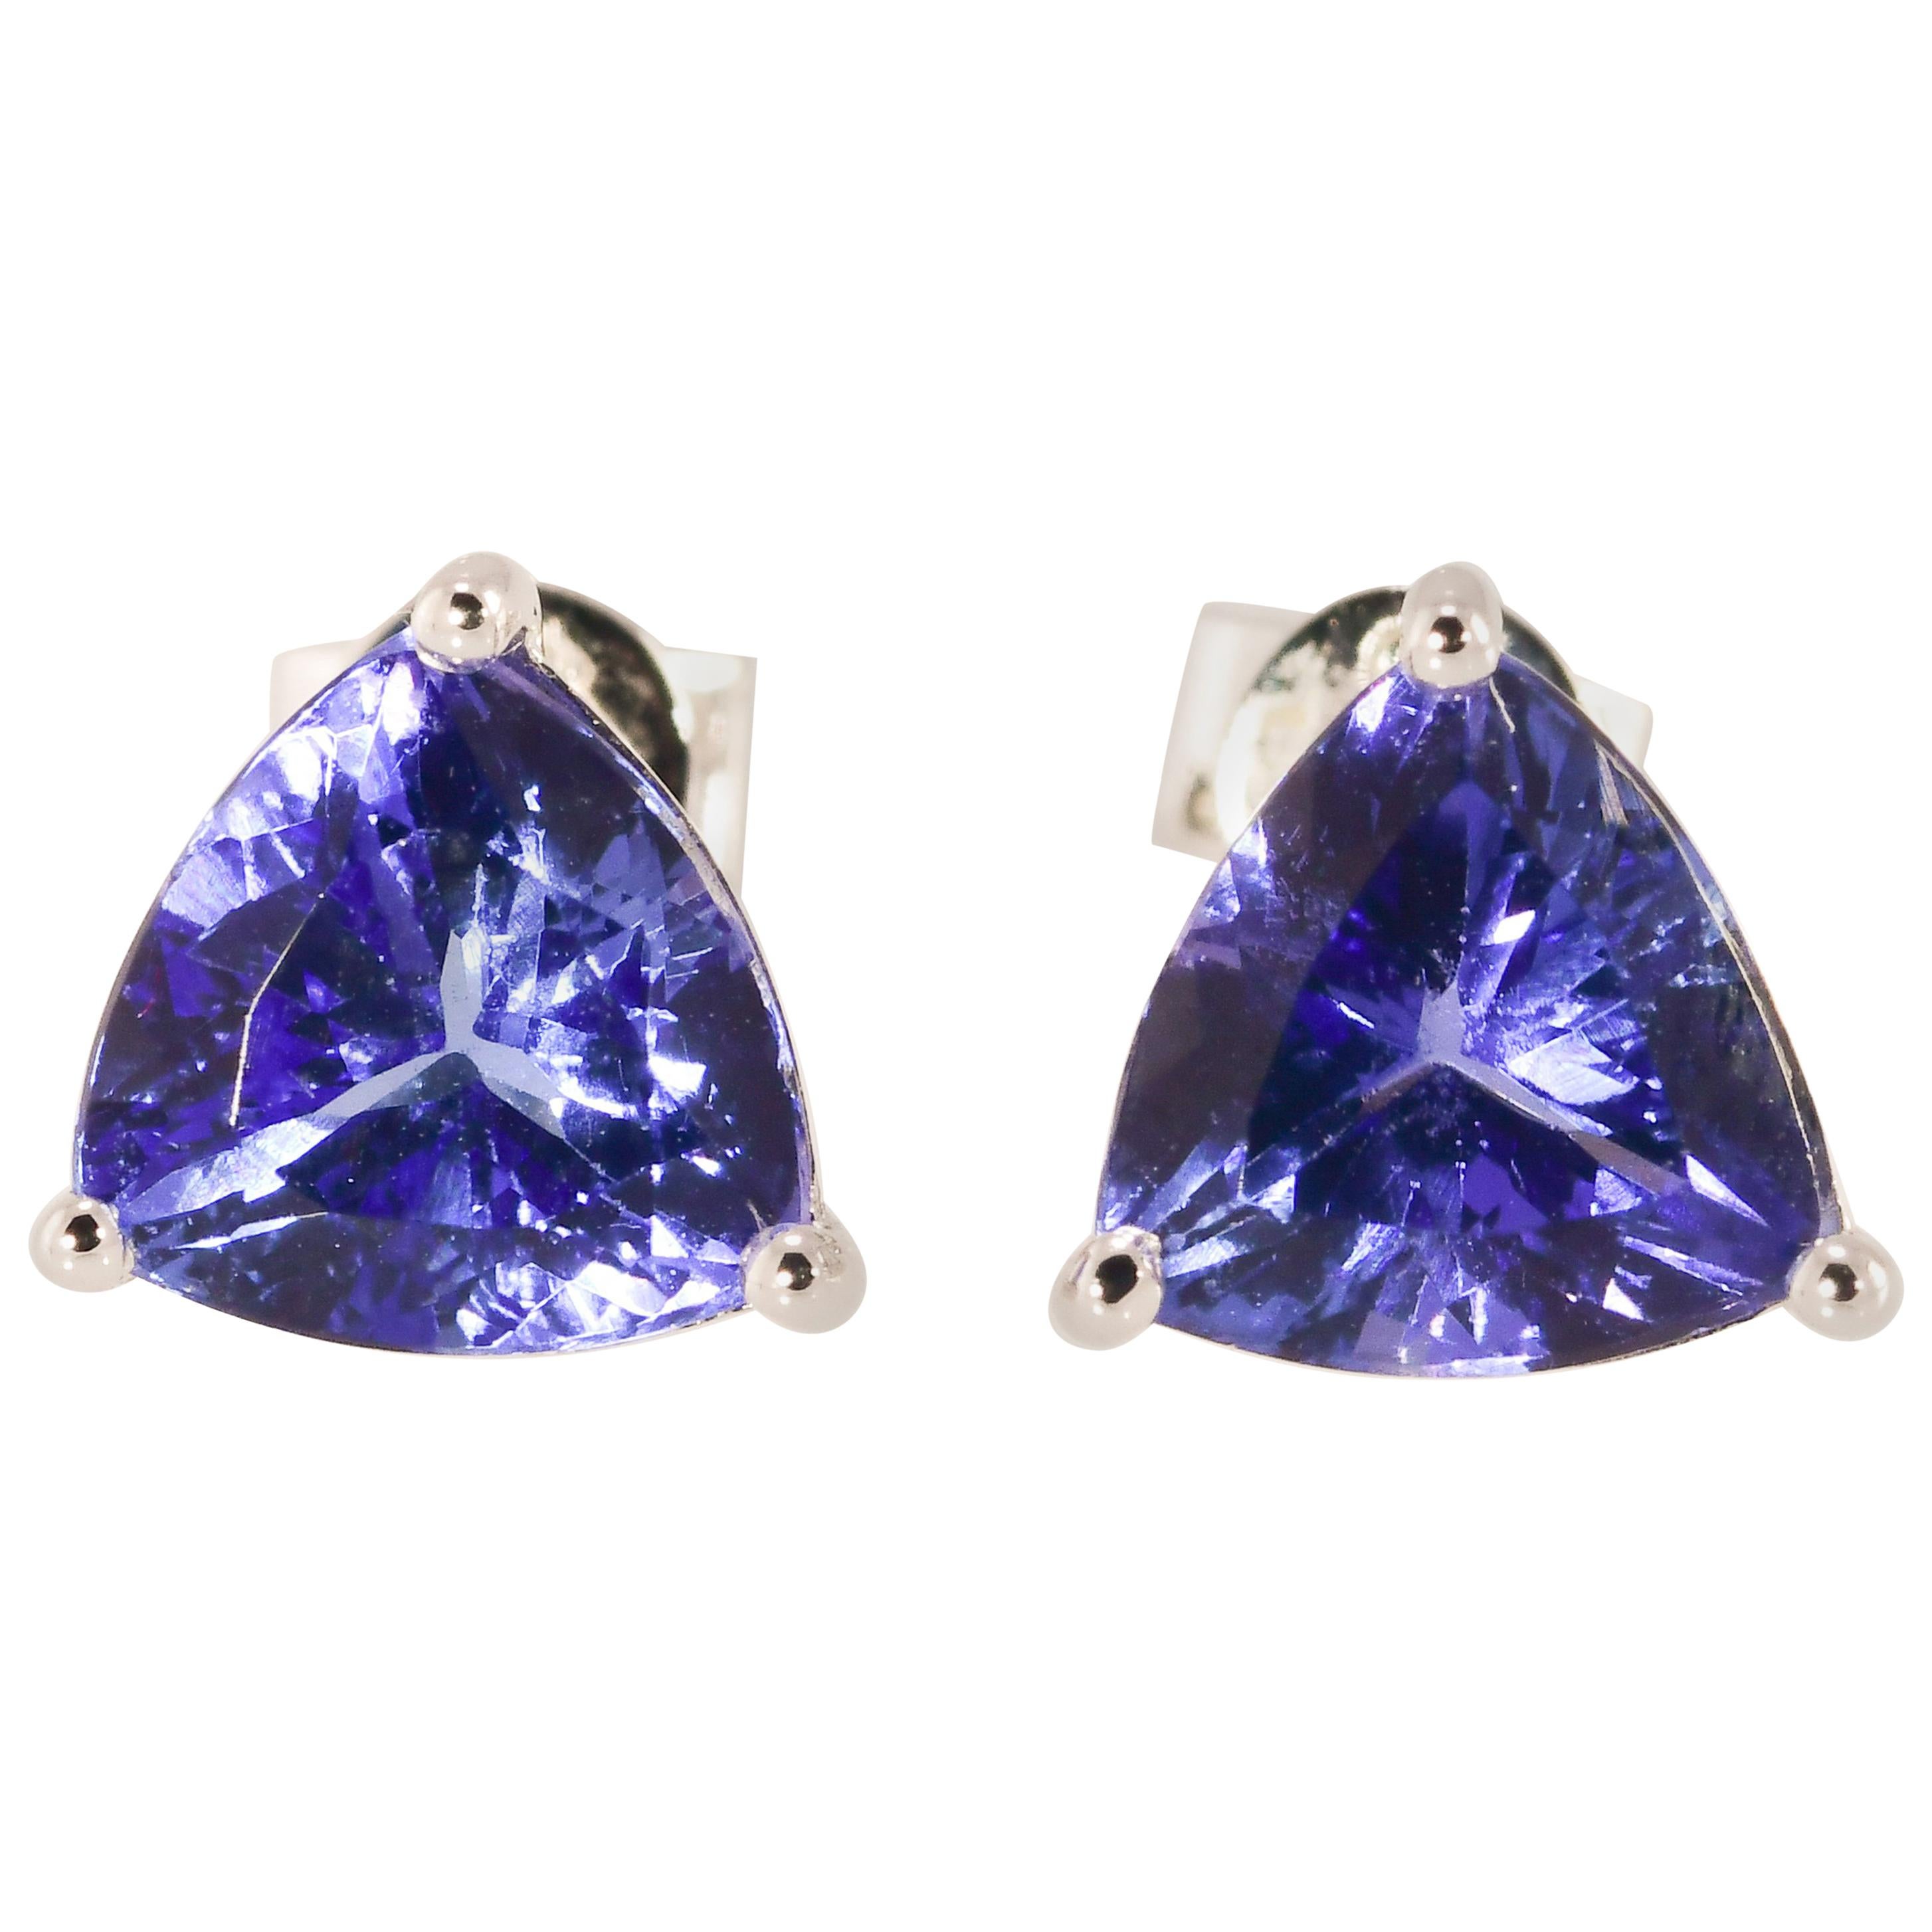 2.6 Carat TW Perfectly Matched Gem Quality Tanzanite Solitaire Earrings 14K WG